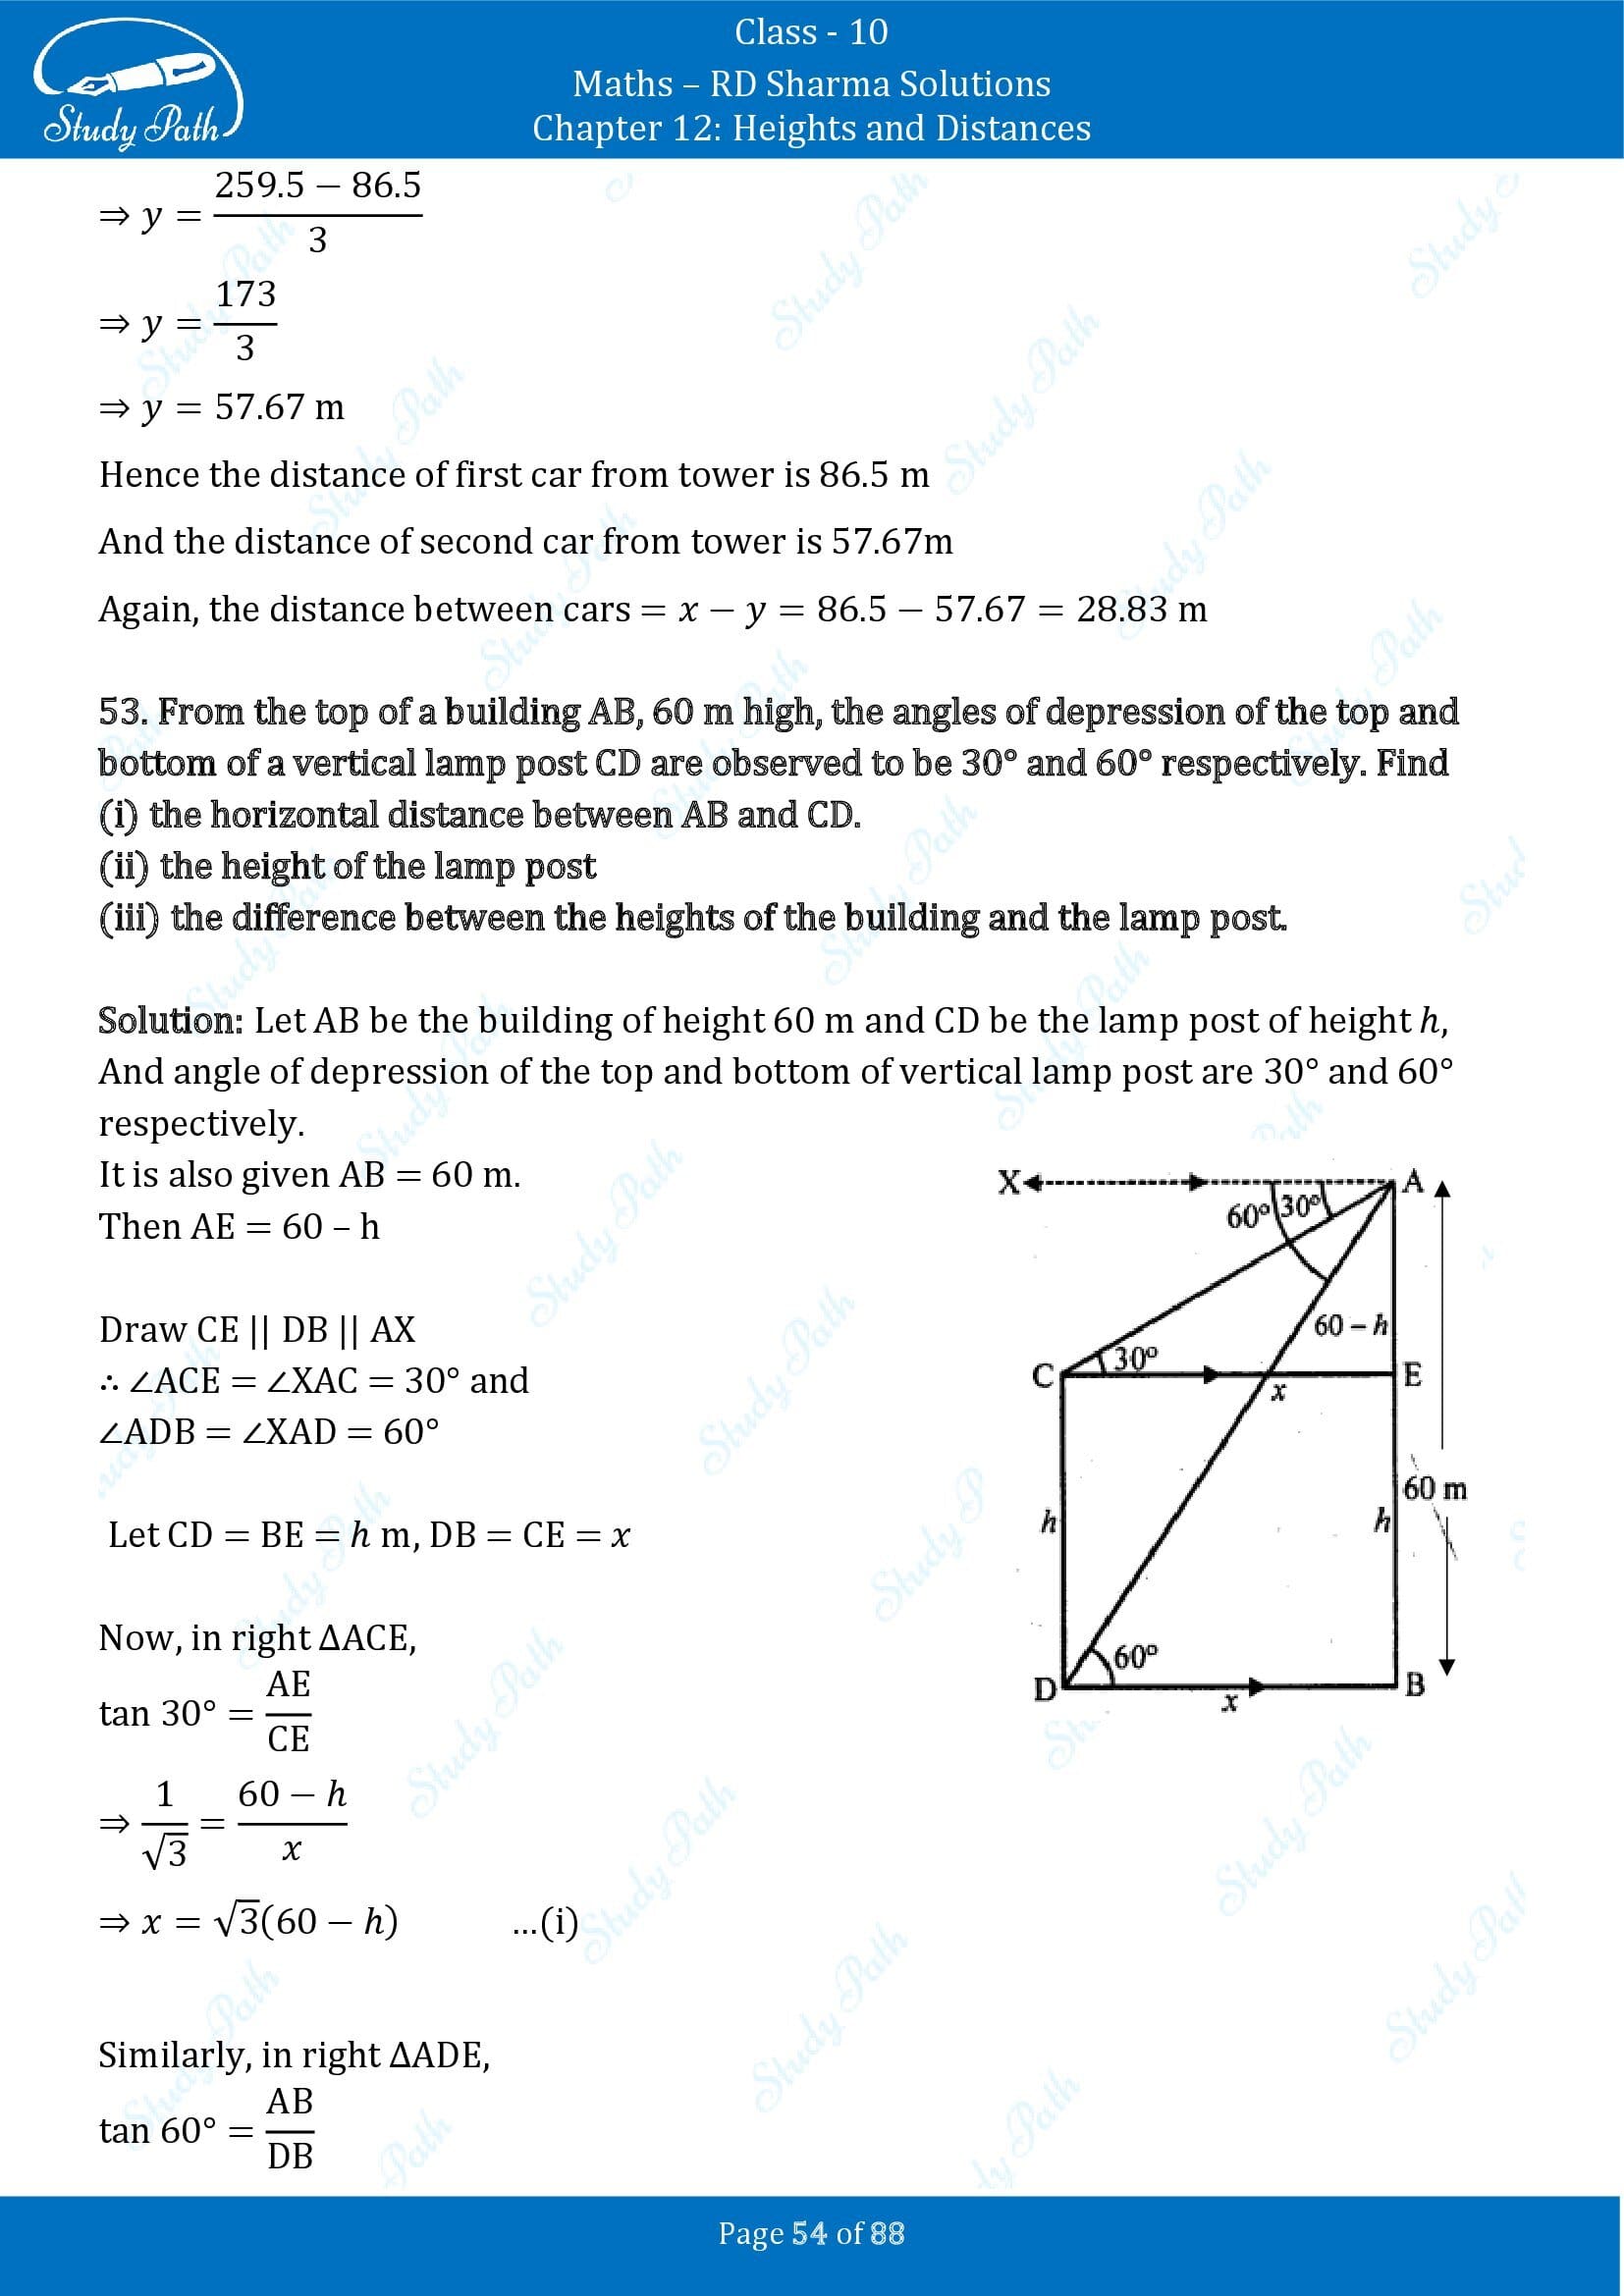 RD Sharma Solutions Class 10 Chapter 12 Heights and Distances Exercise 12.1 00054